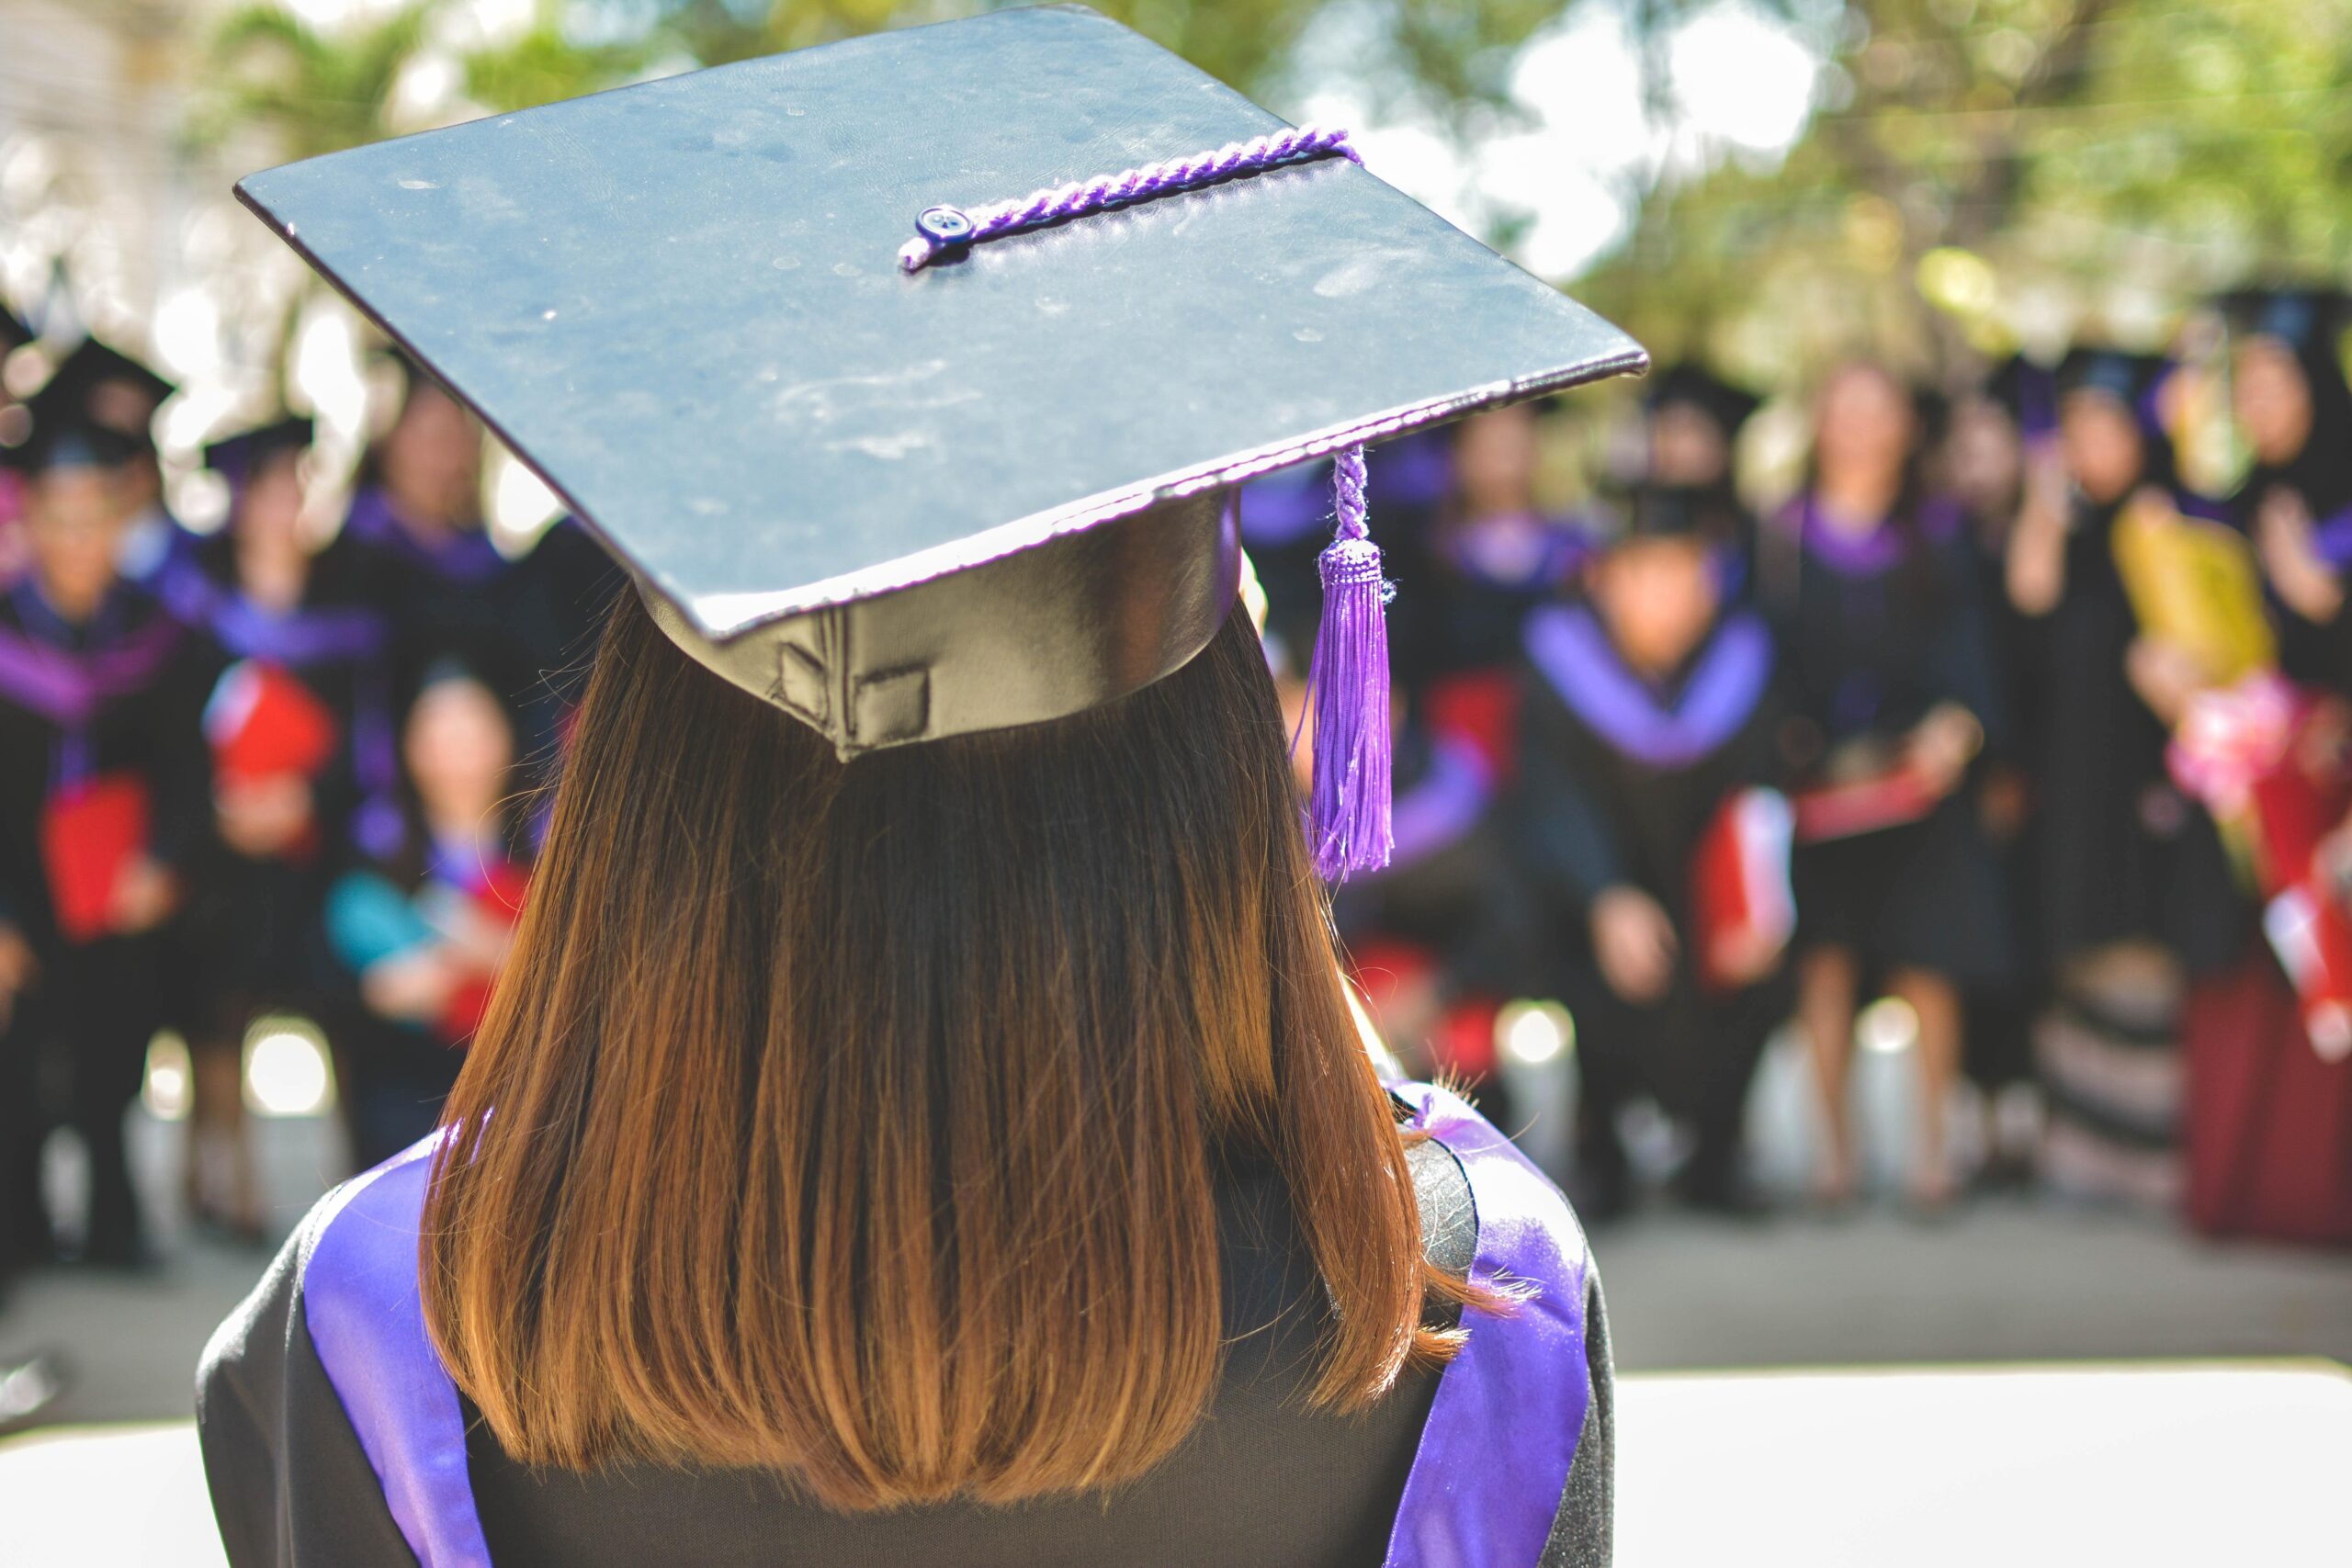 Shot of the back of a woman's head, wearing a graduation cap and gown